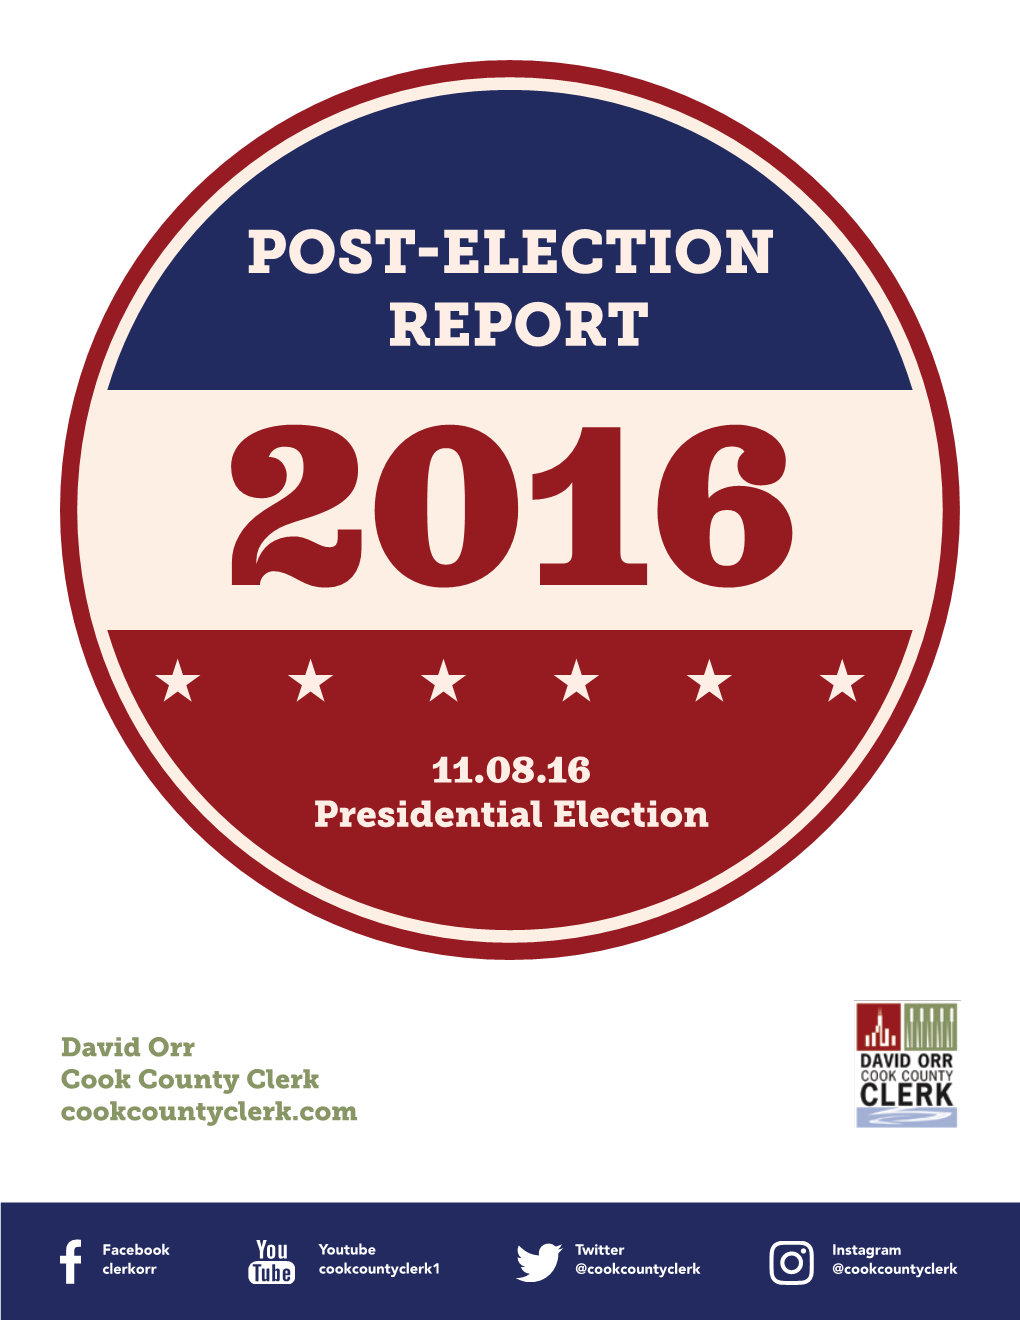 Post-Election Report 2016